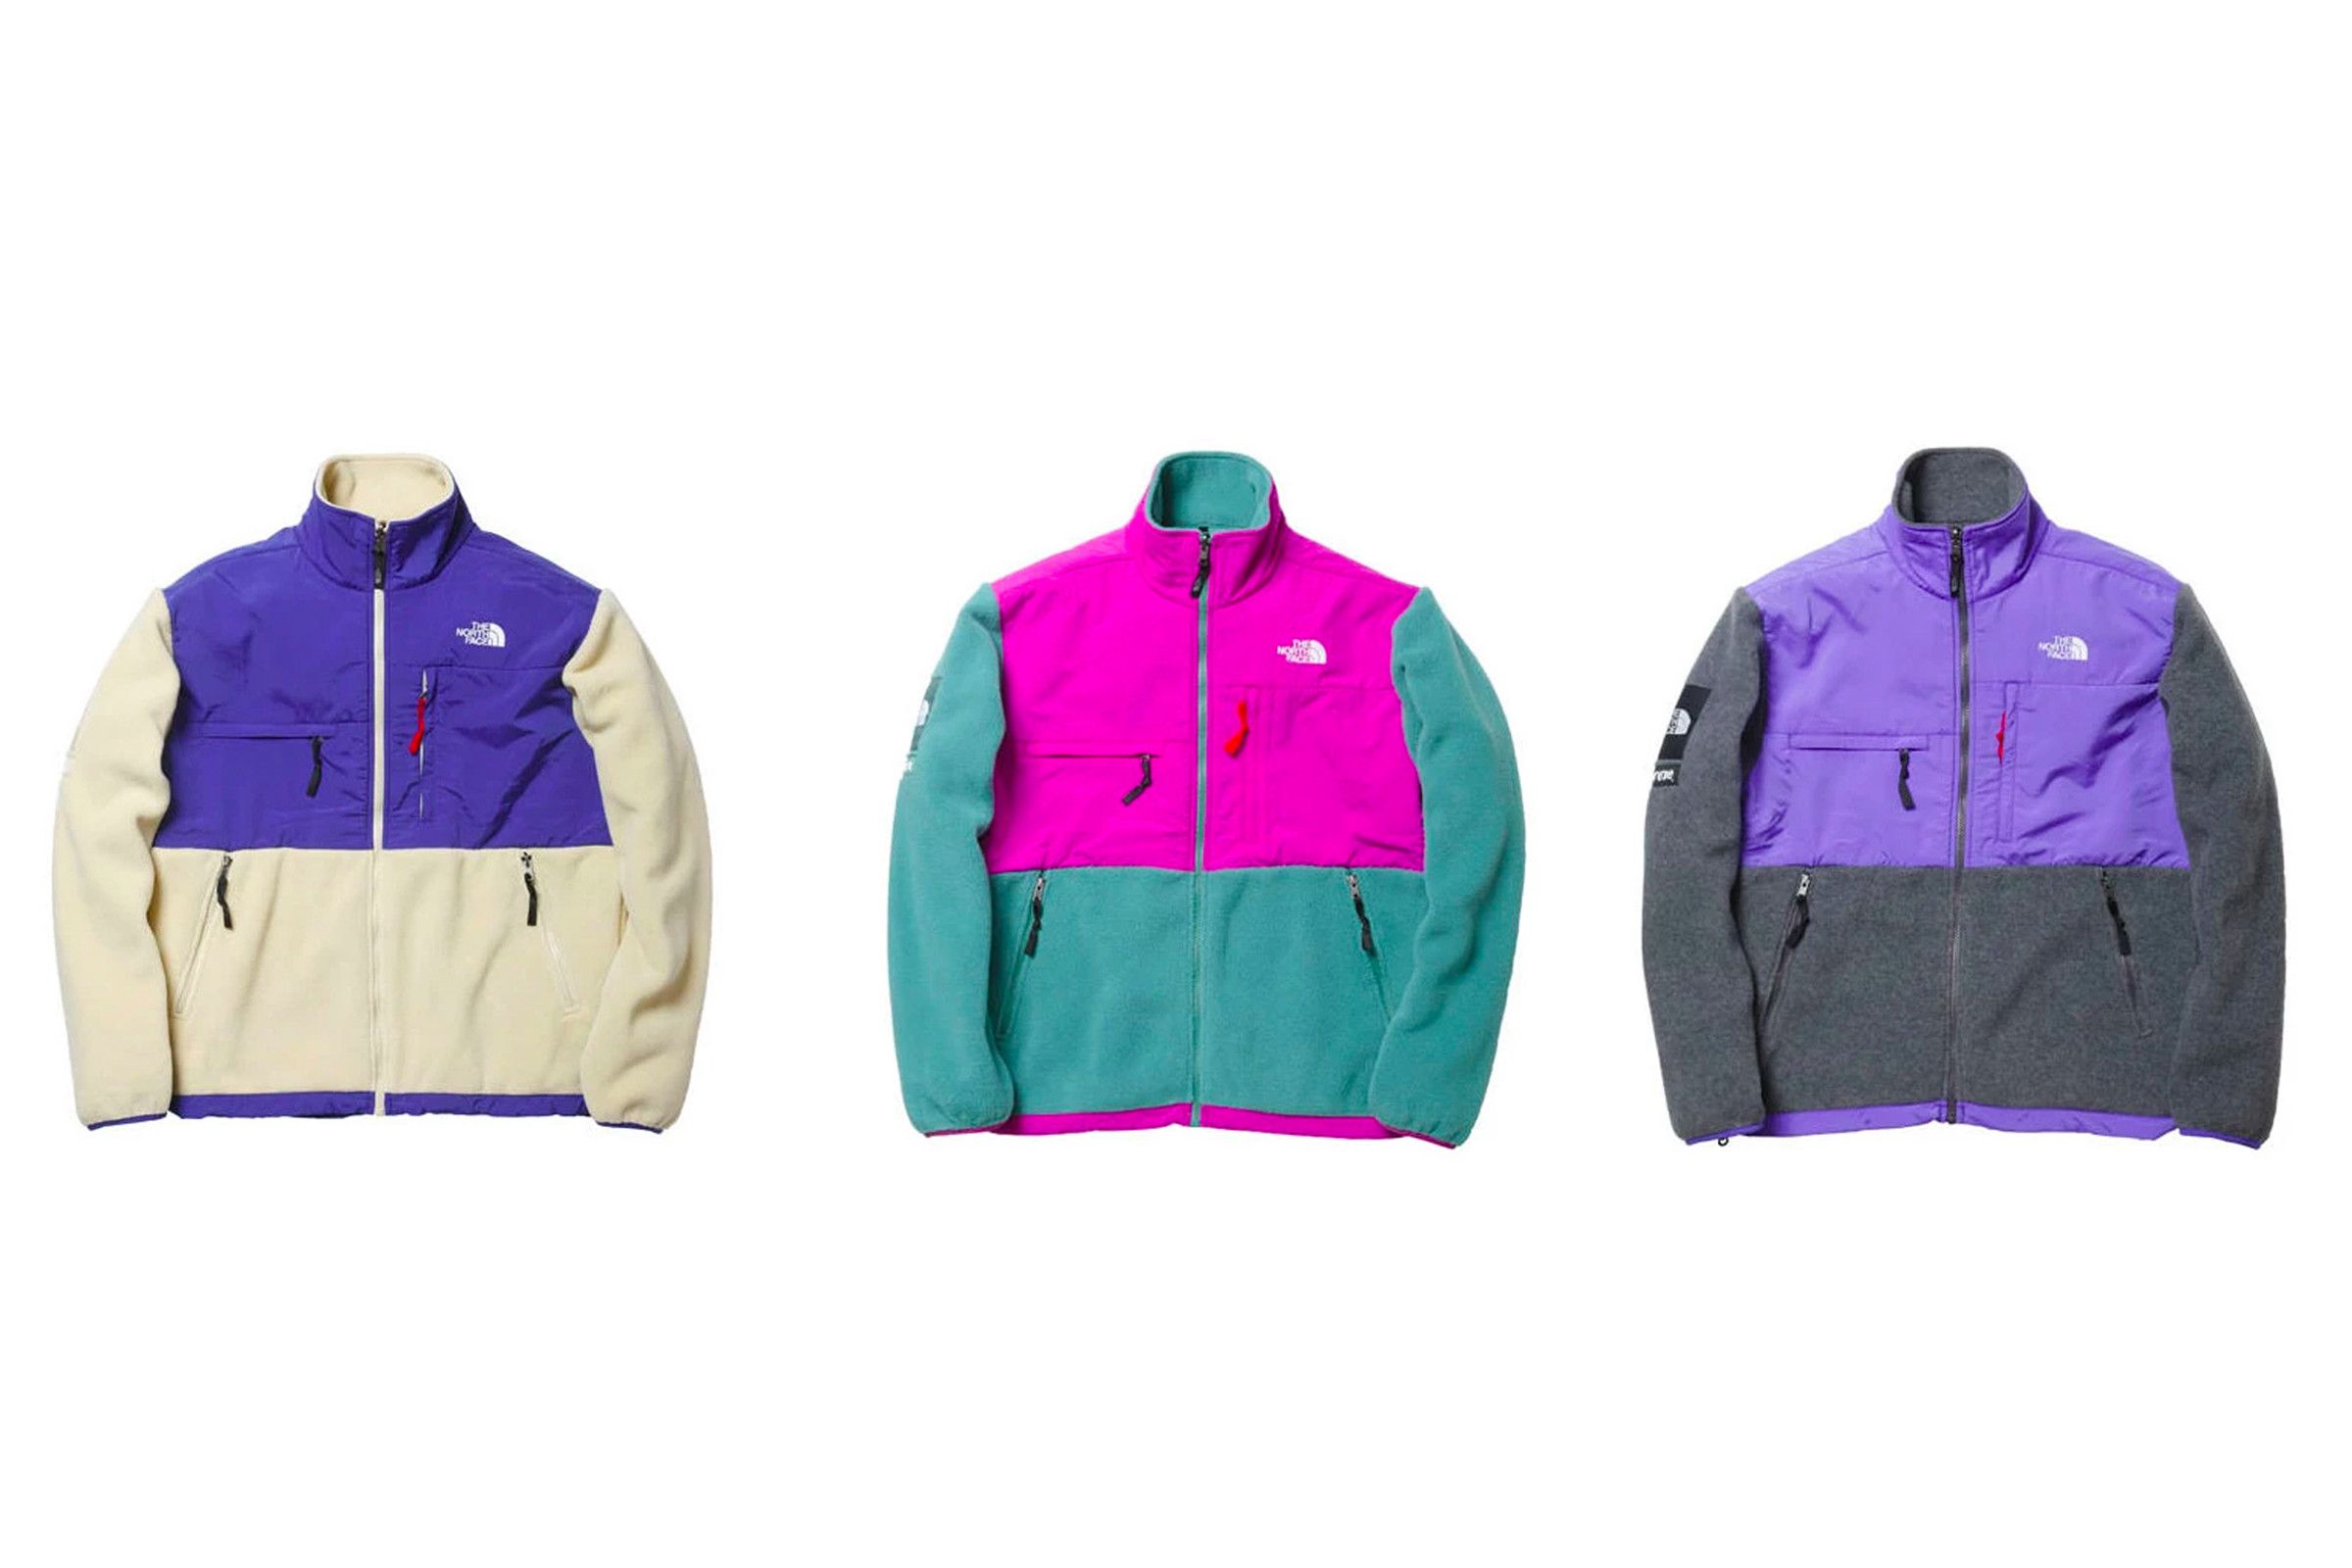 The North Face Expedition Fleece Jacket - fall winter 2018 - Supreme